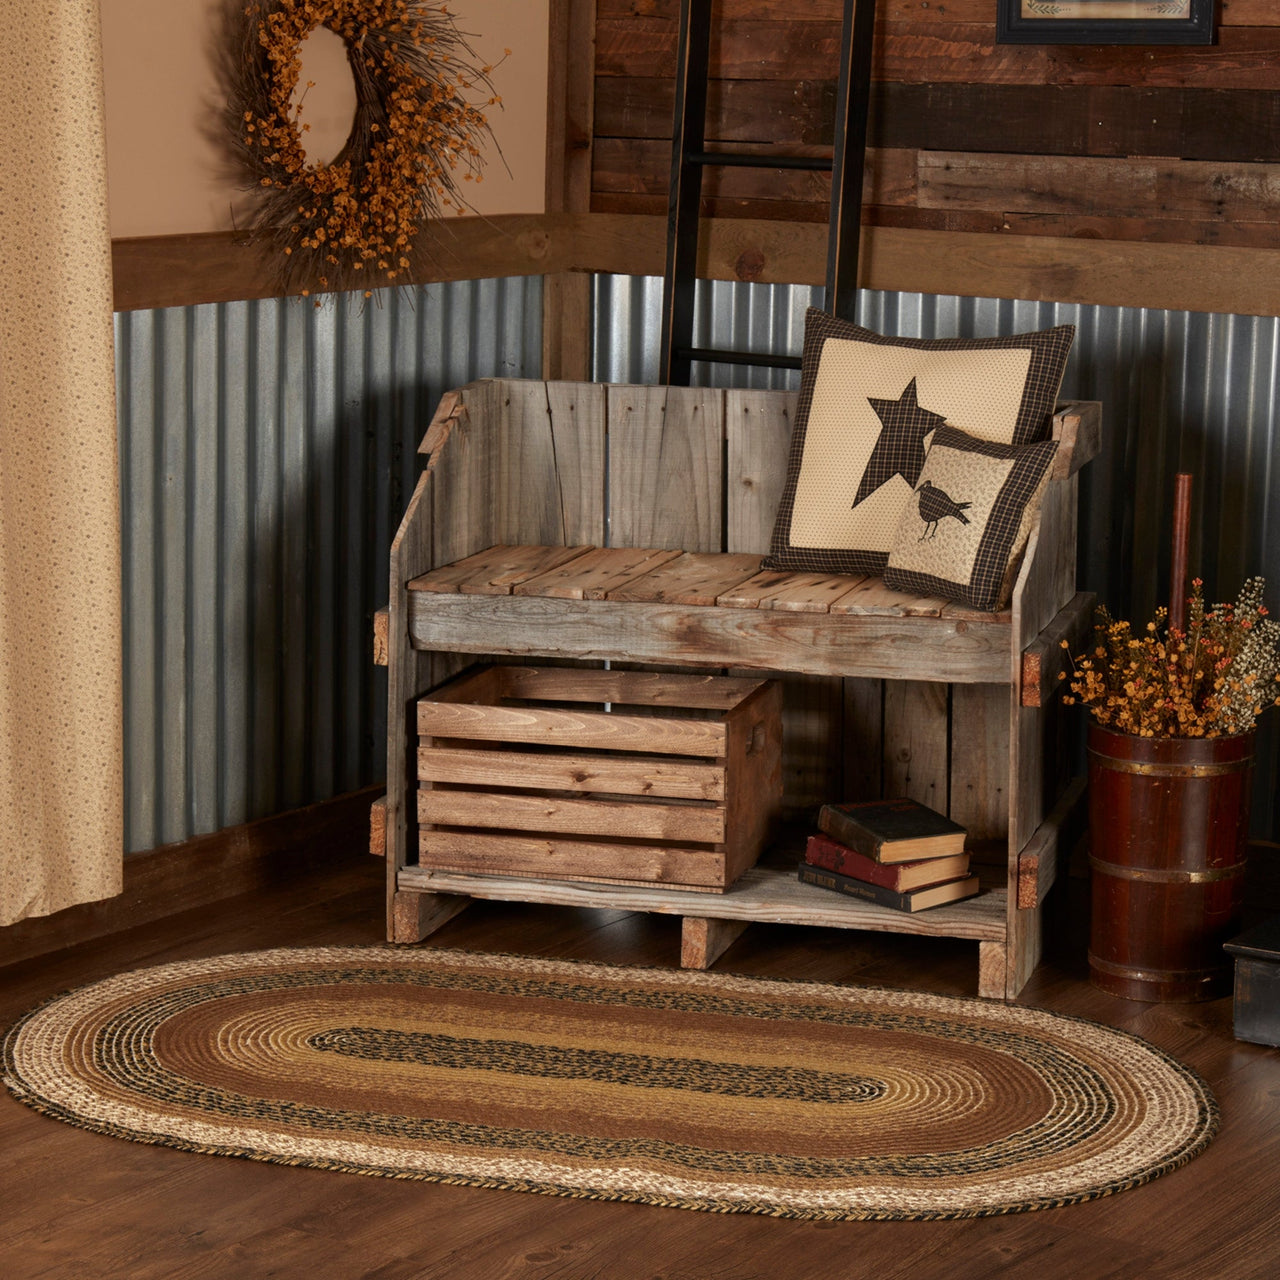 Kettle Grove Jute Oval Braided Rug VHC Brands